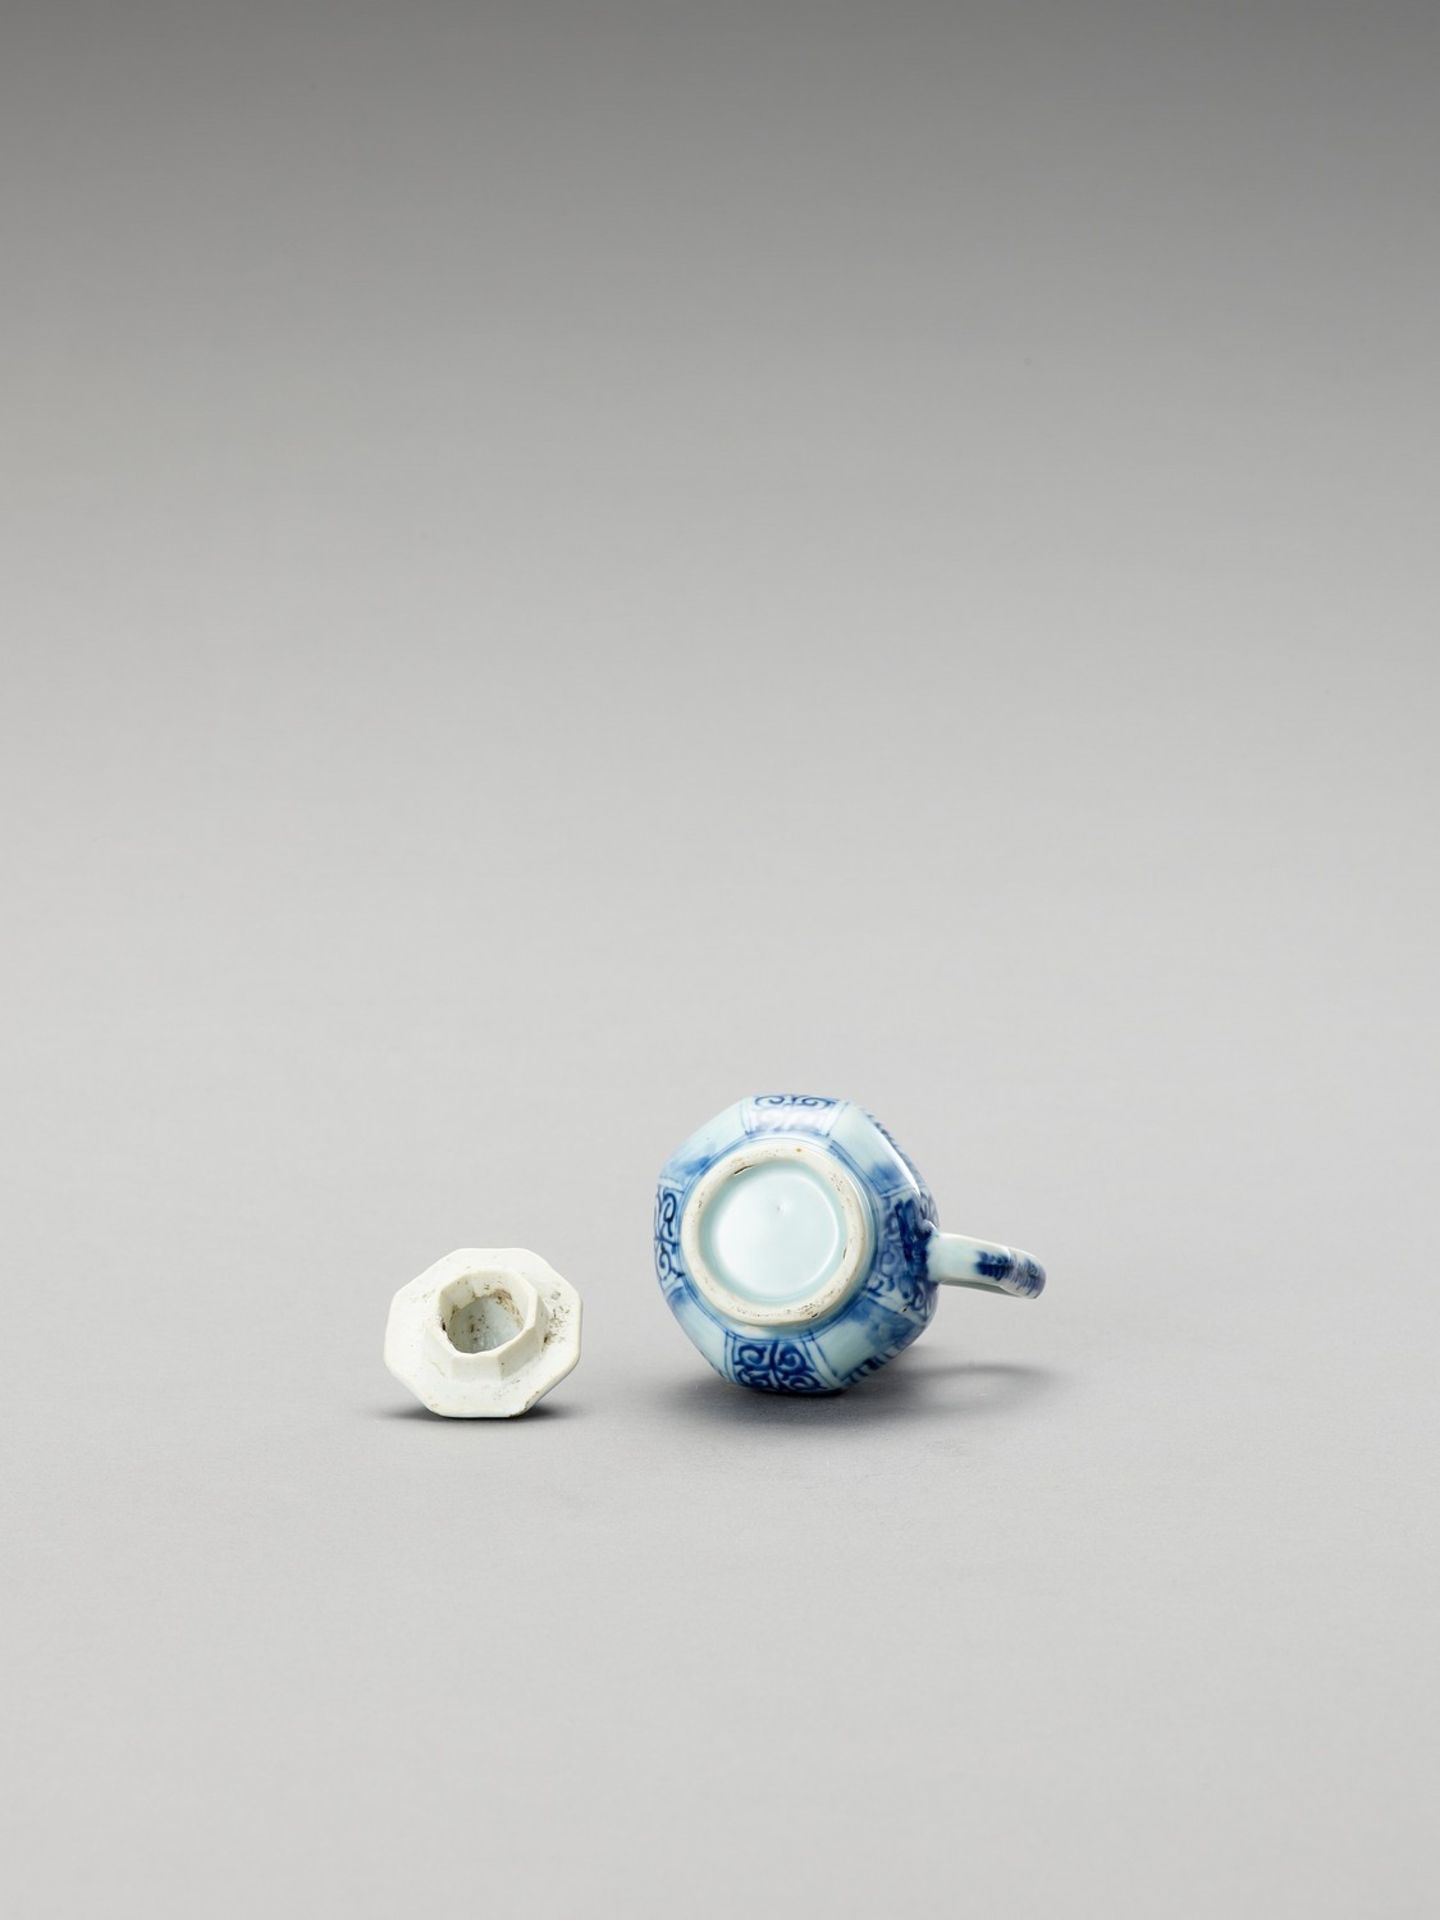 A SMALL BLUE AND WHITE PORCELAIN JUG AND COVER - Image 6 of 6